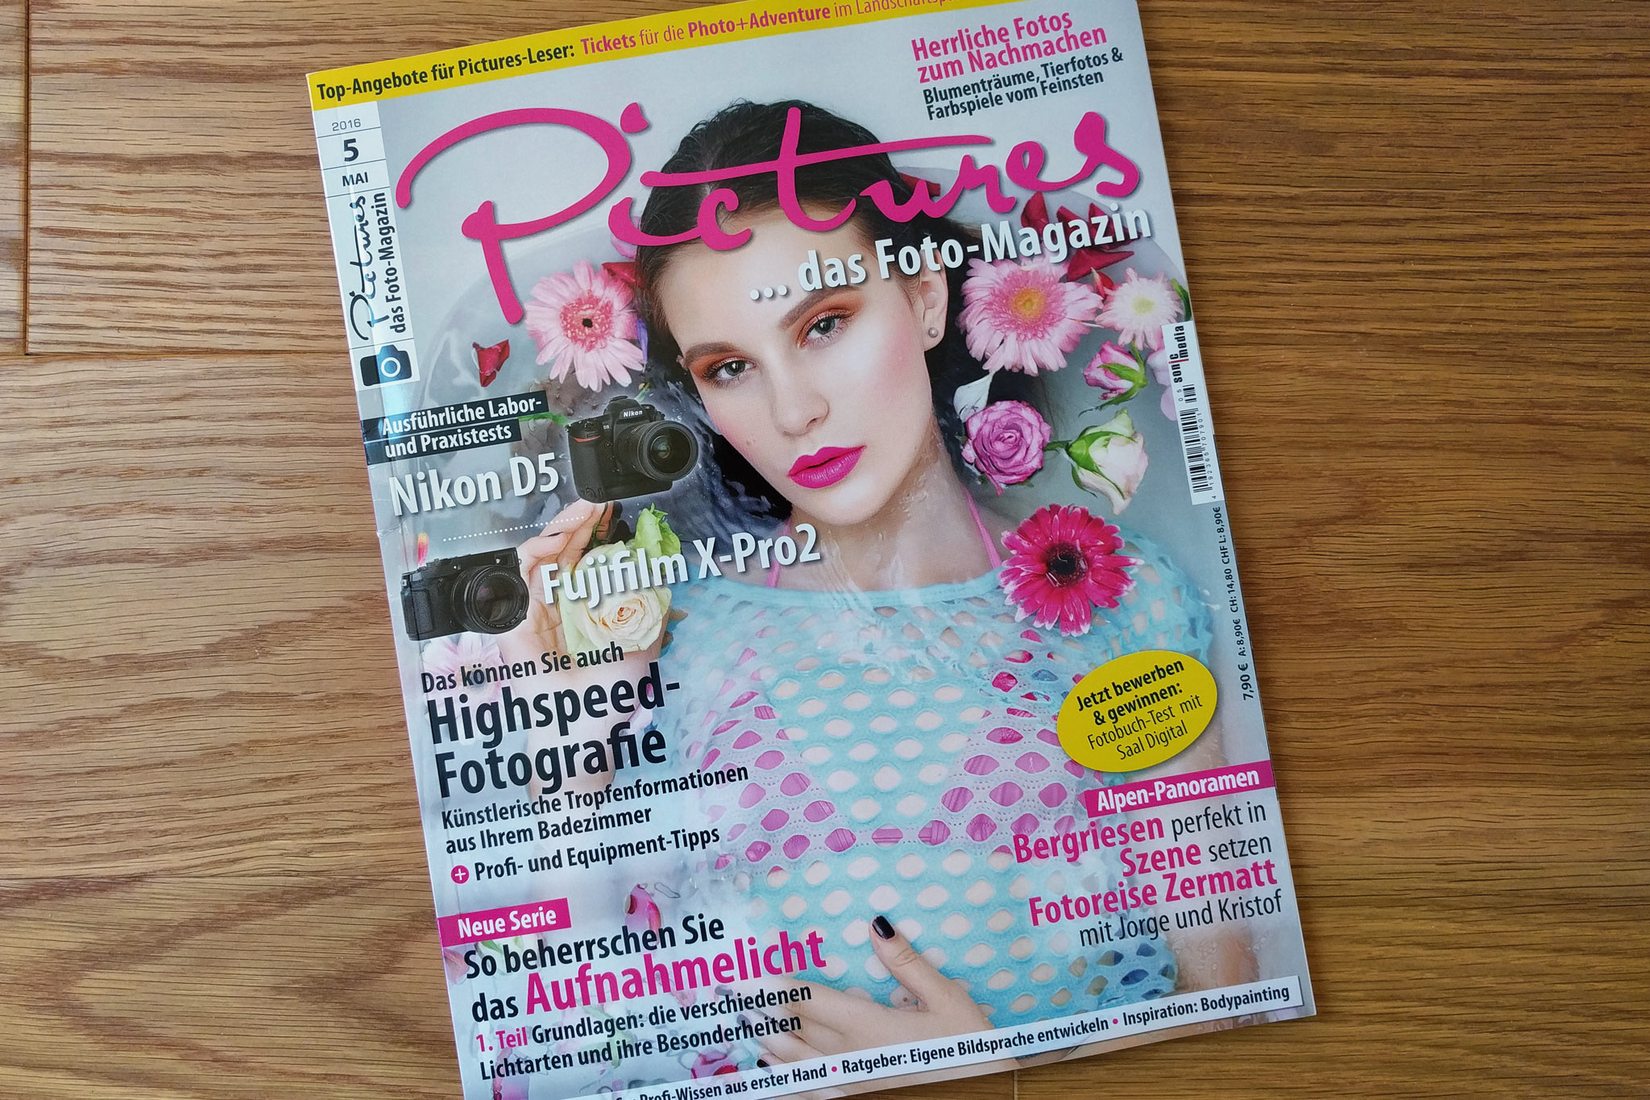 Get published in the next issue of the Pictures Magazin!